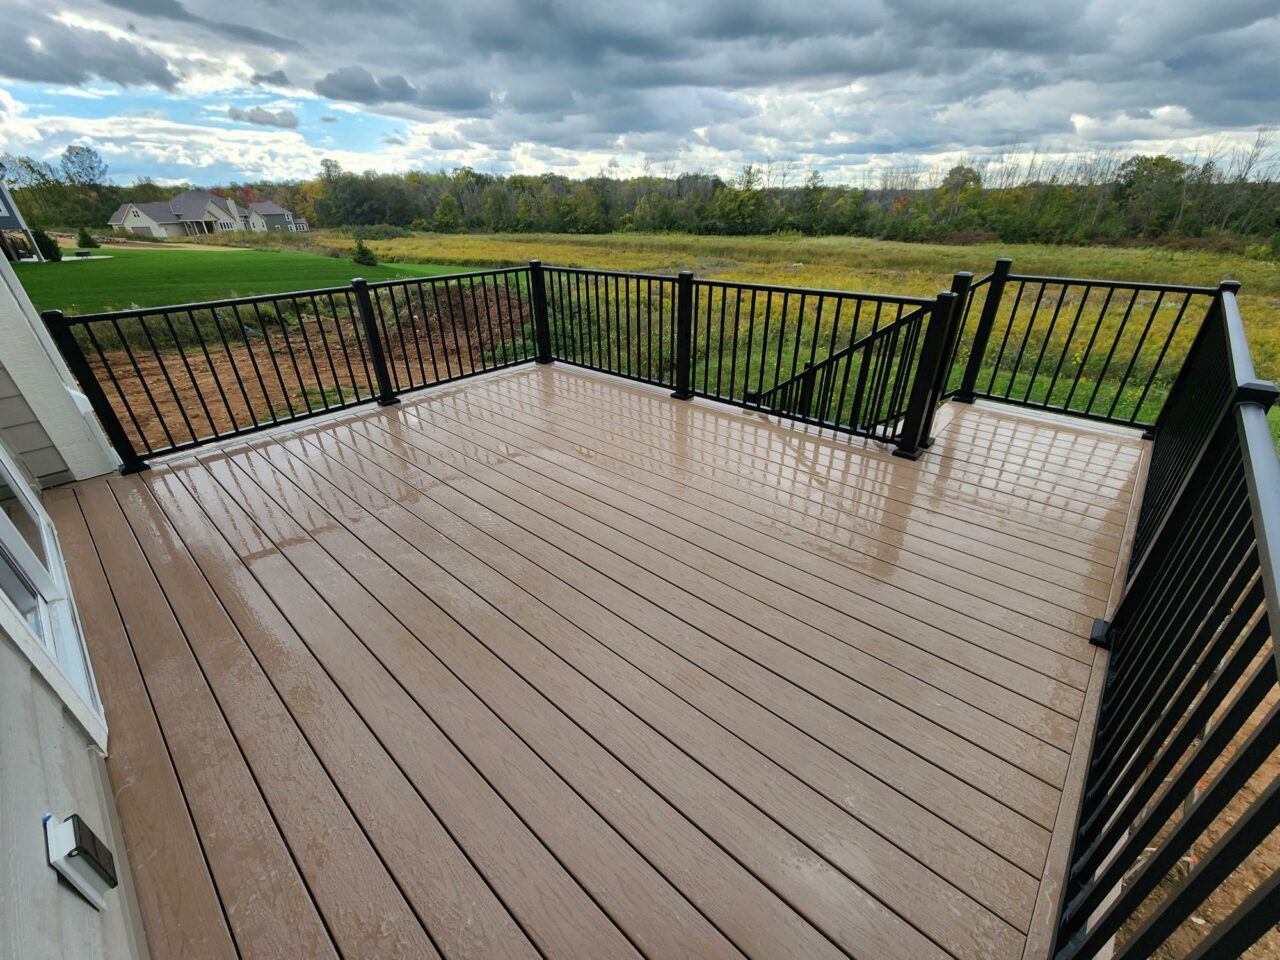 Photo of Wood-Like Composite Decking with Black Metal Railing - Custom multi-level Deck builder and contractor Washington County, WI